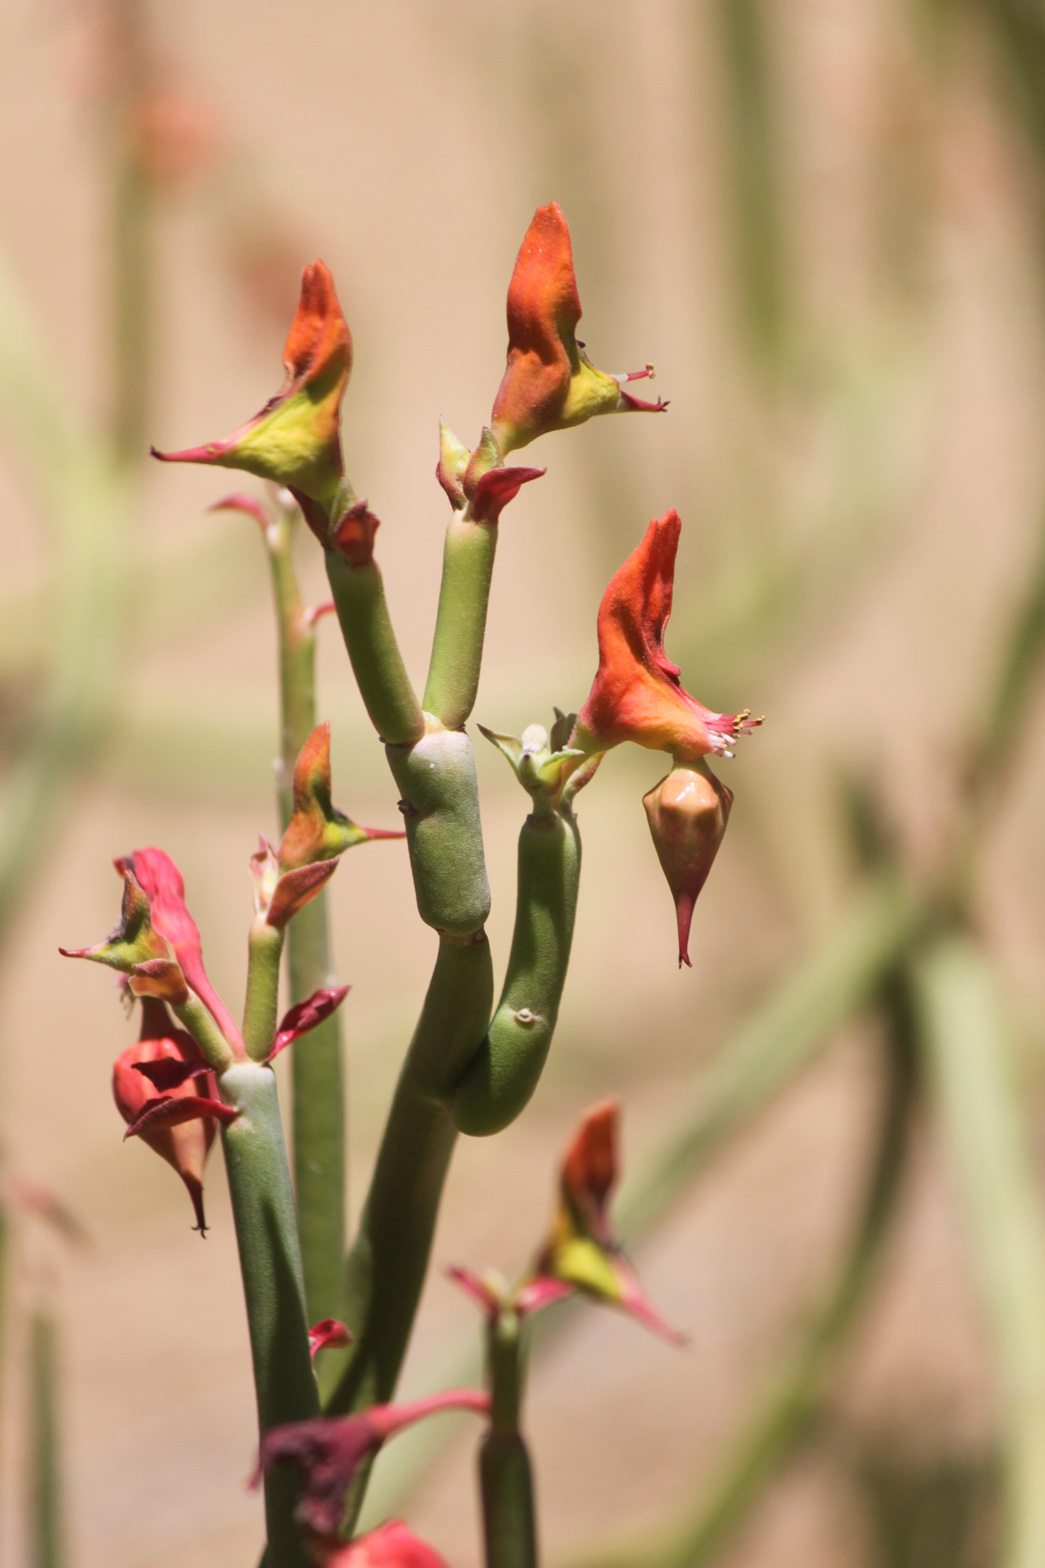 A stalk with multiple red flowers.